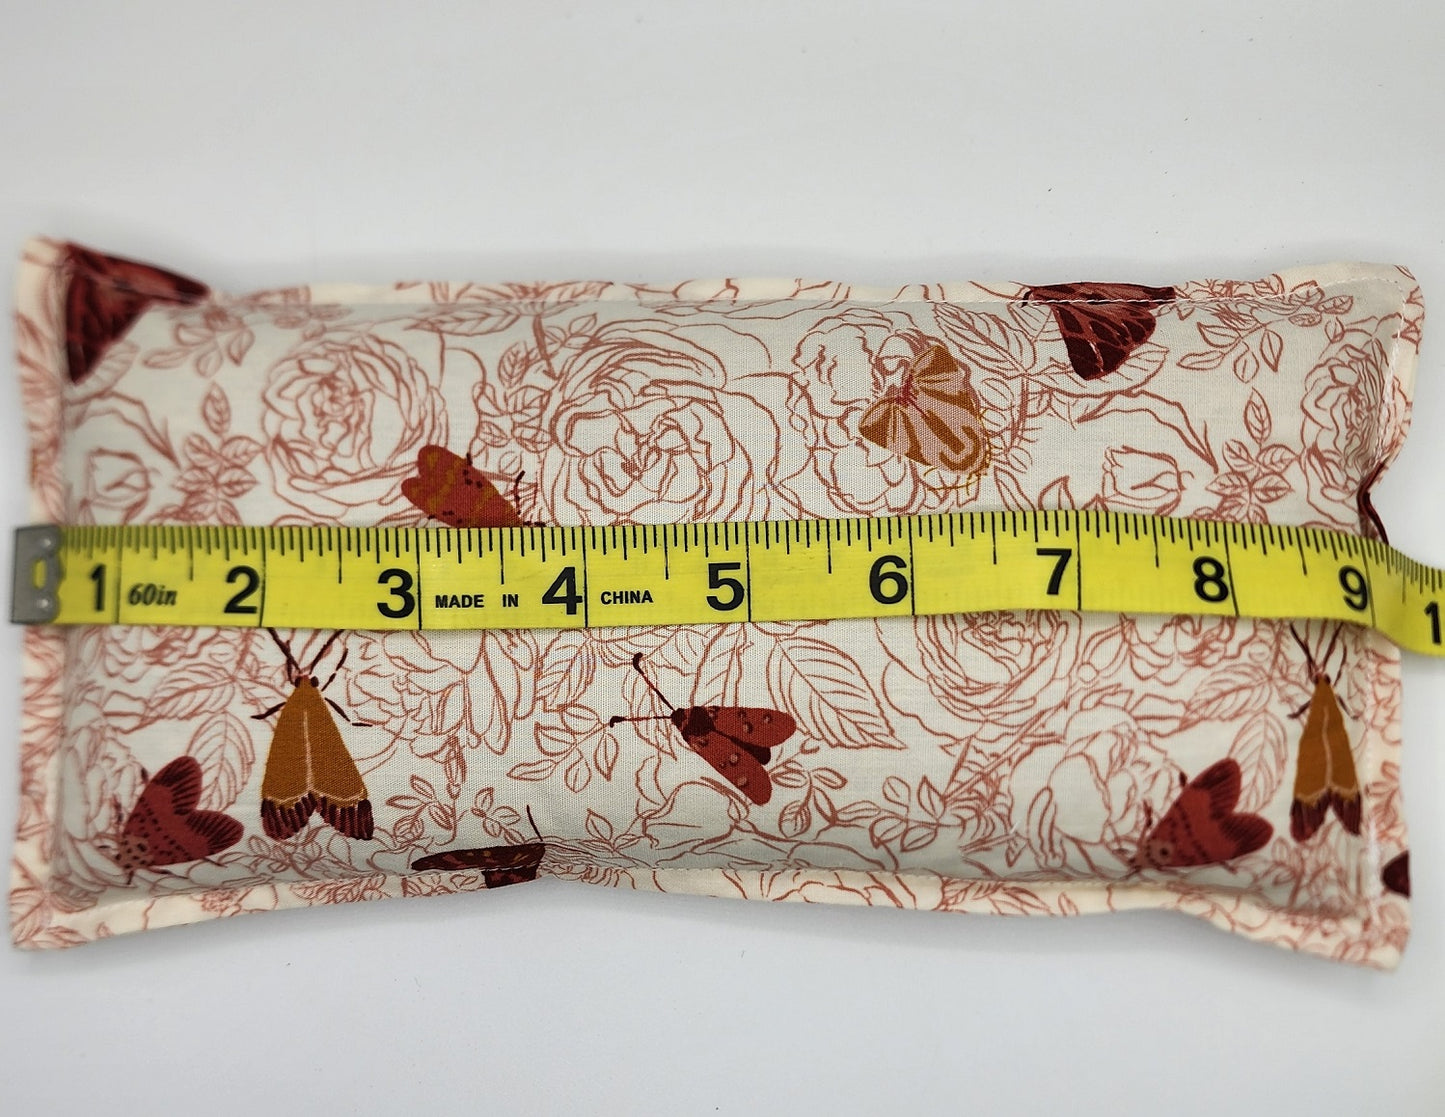 Moths & Flowers Flaxseed Aromatherapy PEPPERMINT Eye / Forehead Pillow / Headache Helper / Cold Pack/ Hot Pad